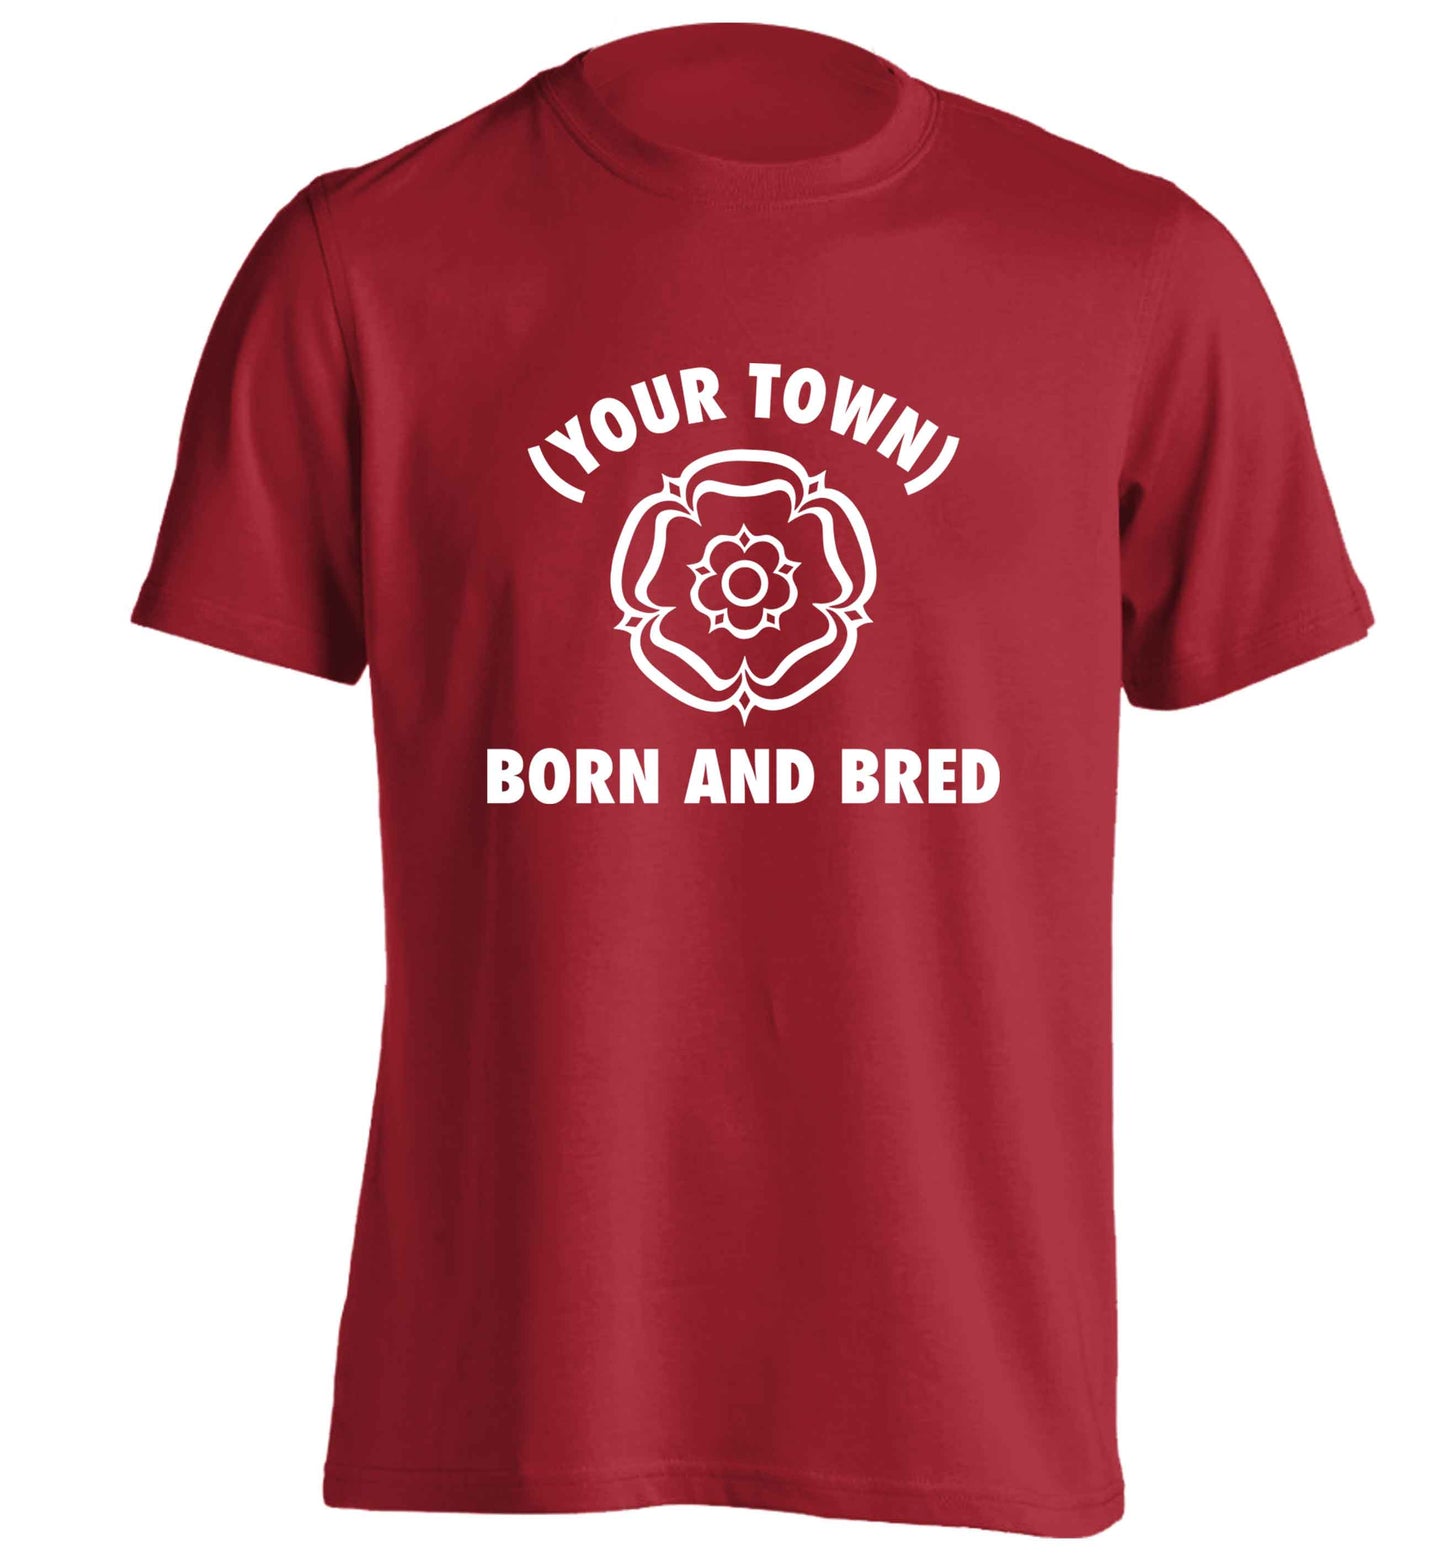 Personalised born and bred adults unisex red Tshirt 2XL